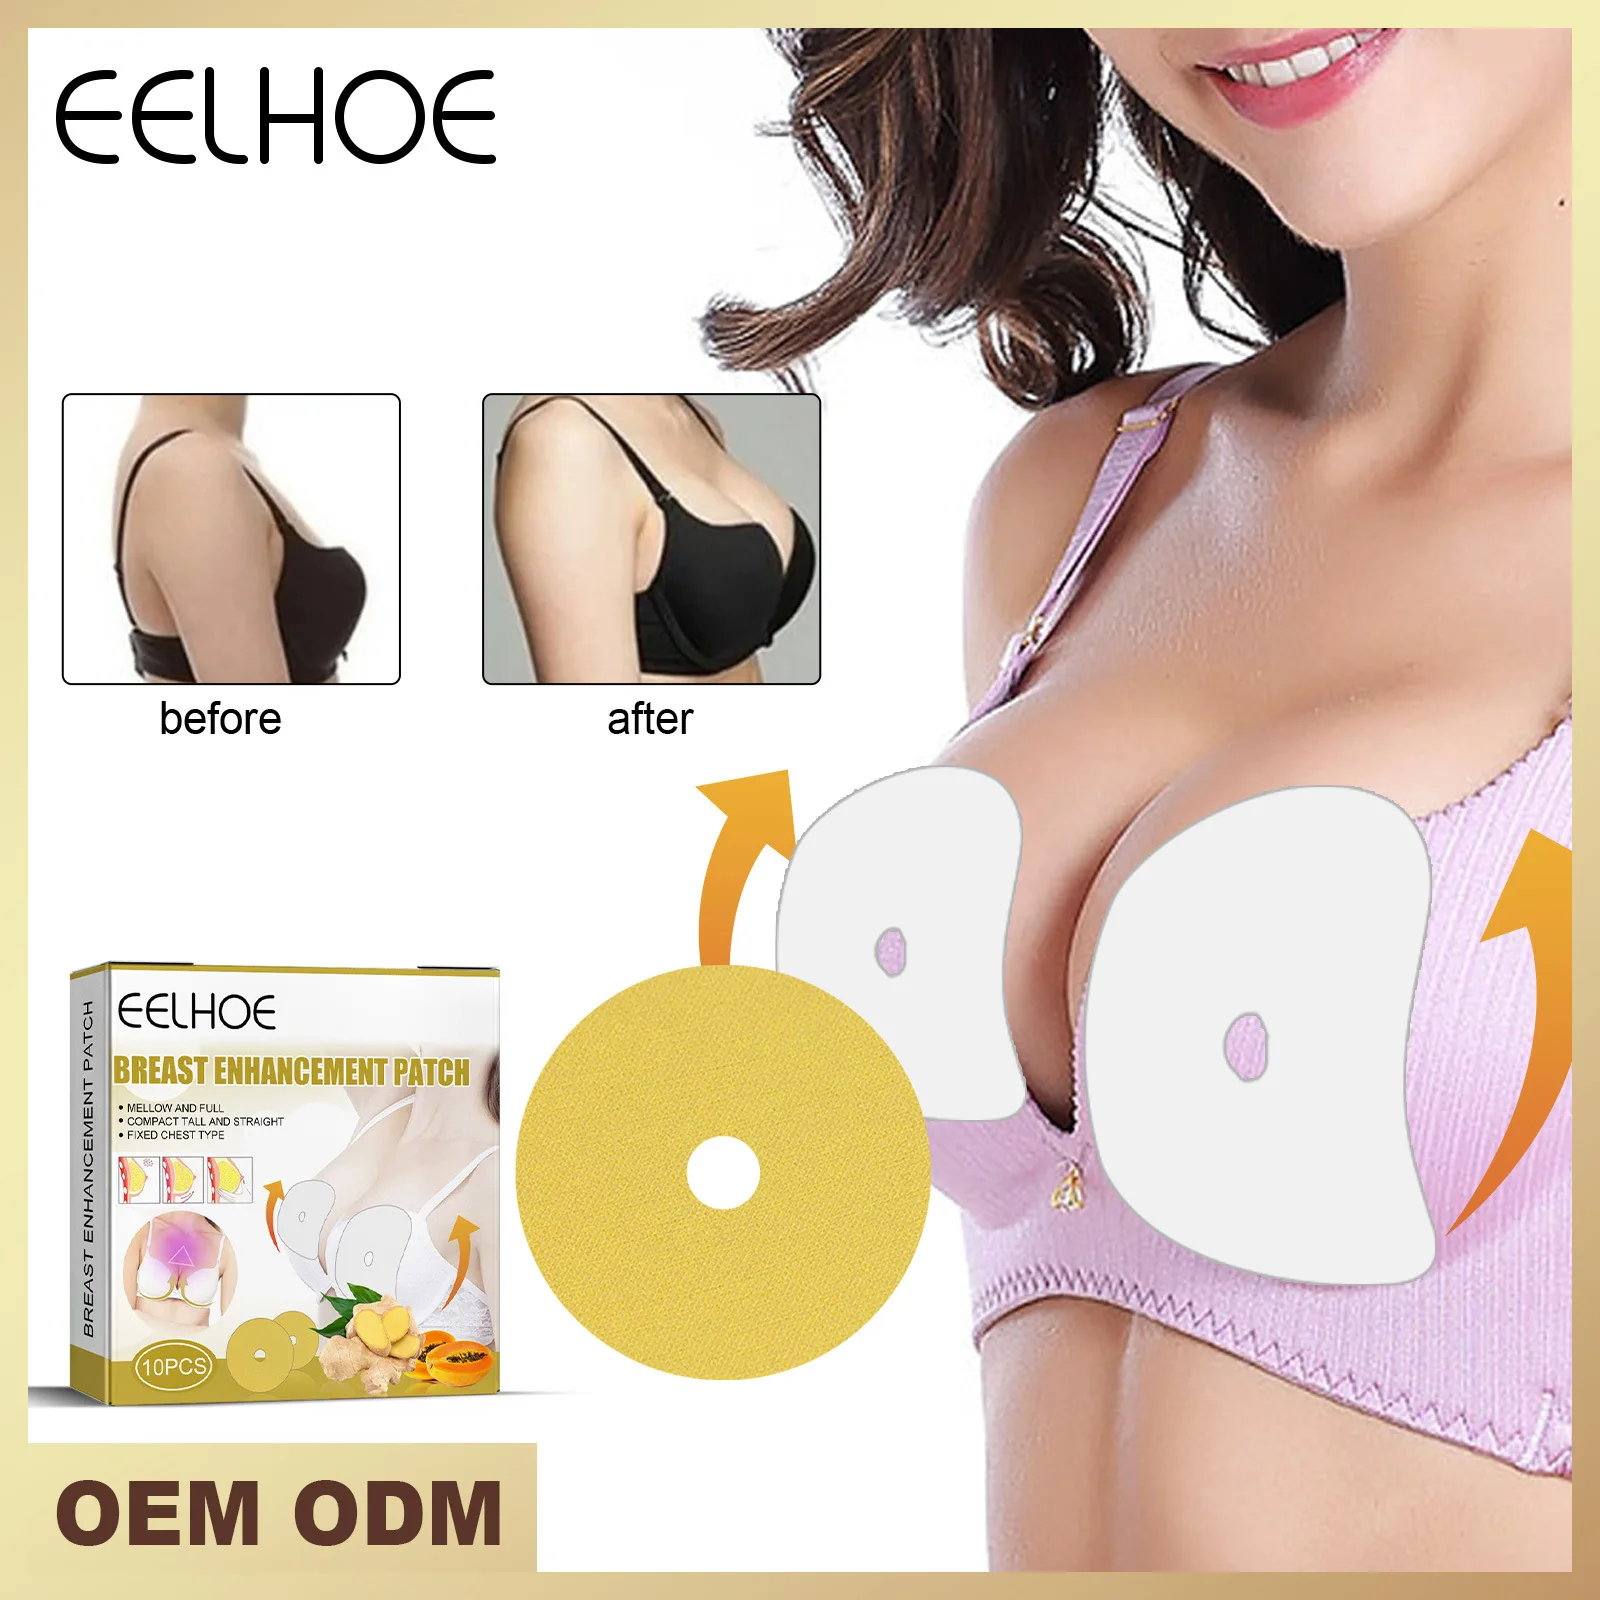 EELHOE Breast Enlargement Patch Plumping Firm Firm Full Breast Care Ginger Breast Patch Breast Enlargement Lifting Breast Patch